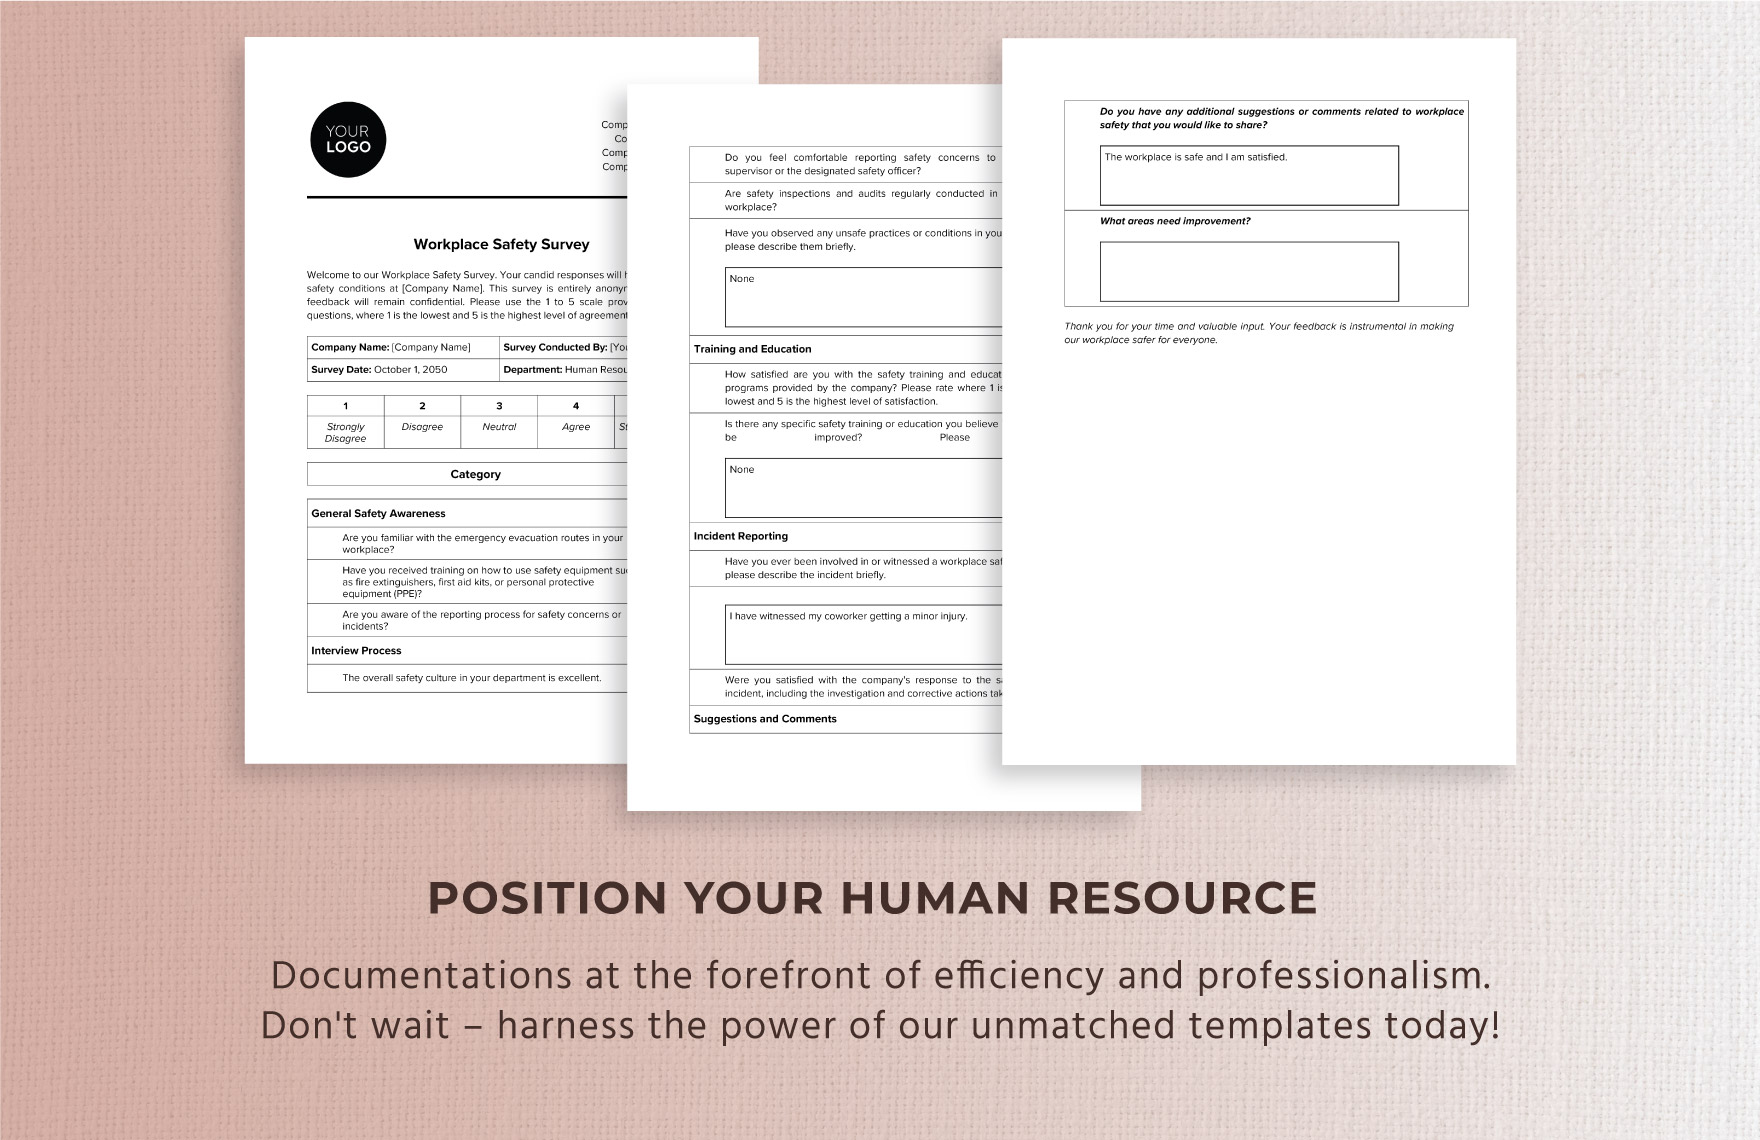 Workplace Safety Survey HR Template